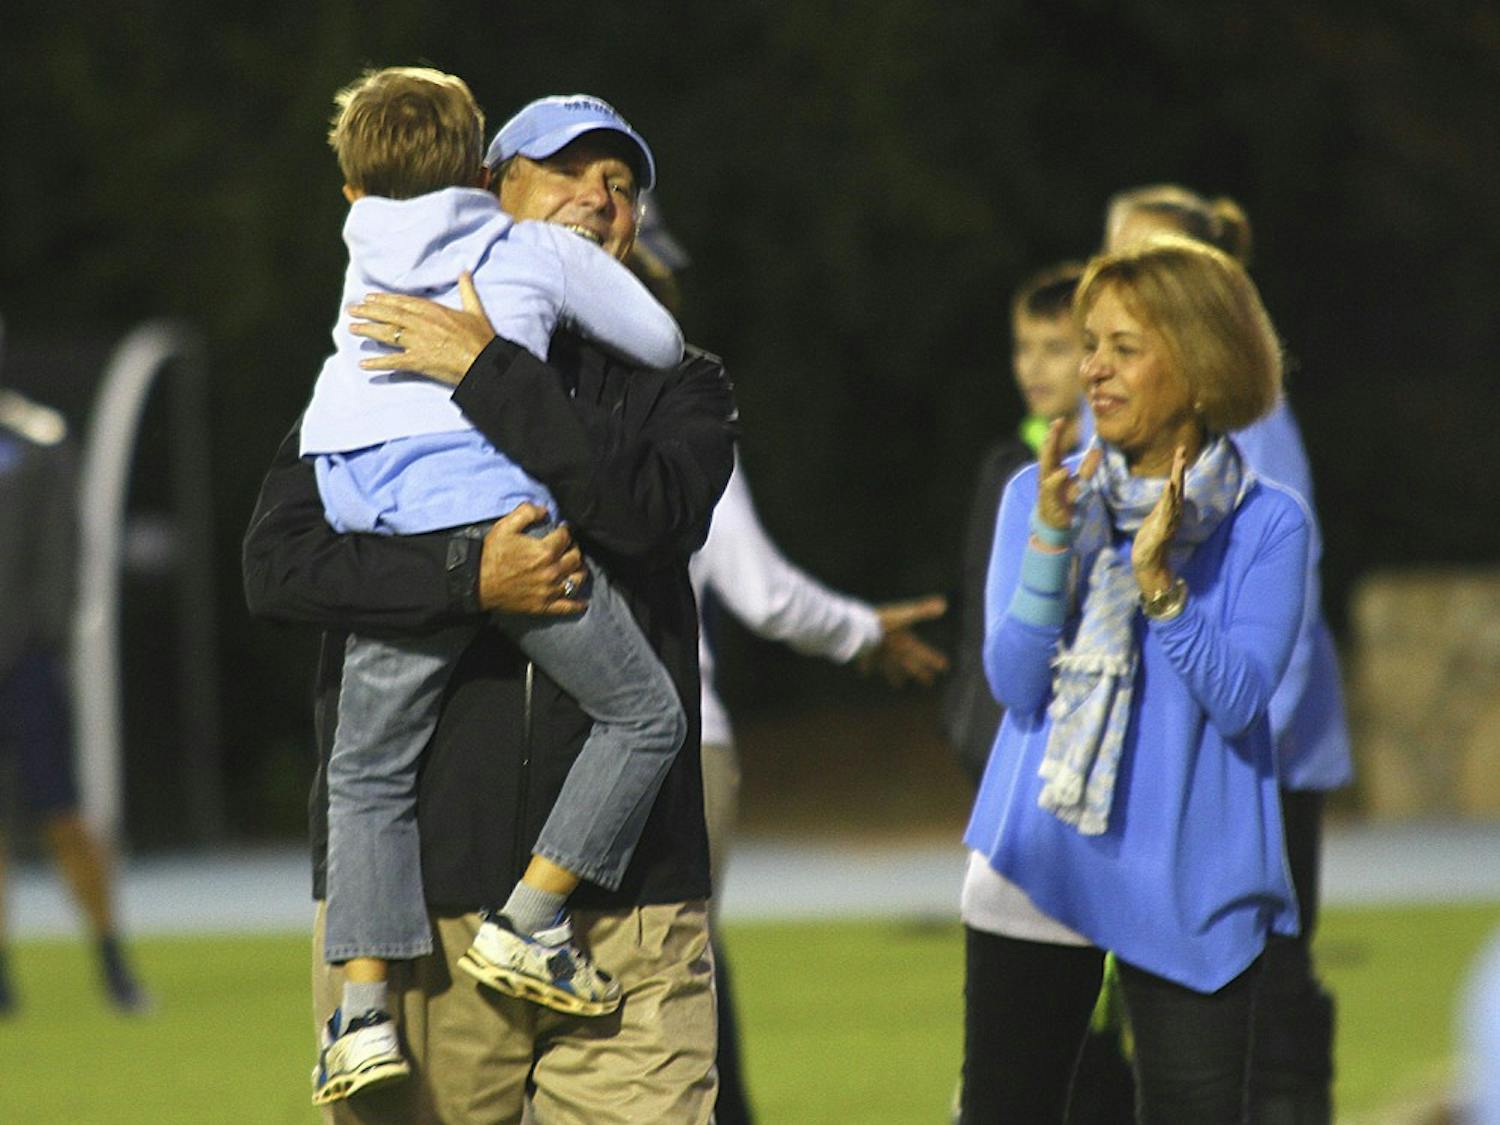 UNC Women's Soccer Head Coach Anson Dorrance with family after a historic 800th win as Head Coach.http://www.goheels.com/SportSelect.dbml?SPSID=668177&SPID=12982